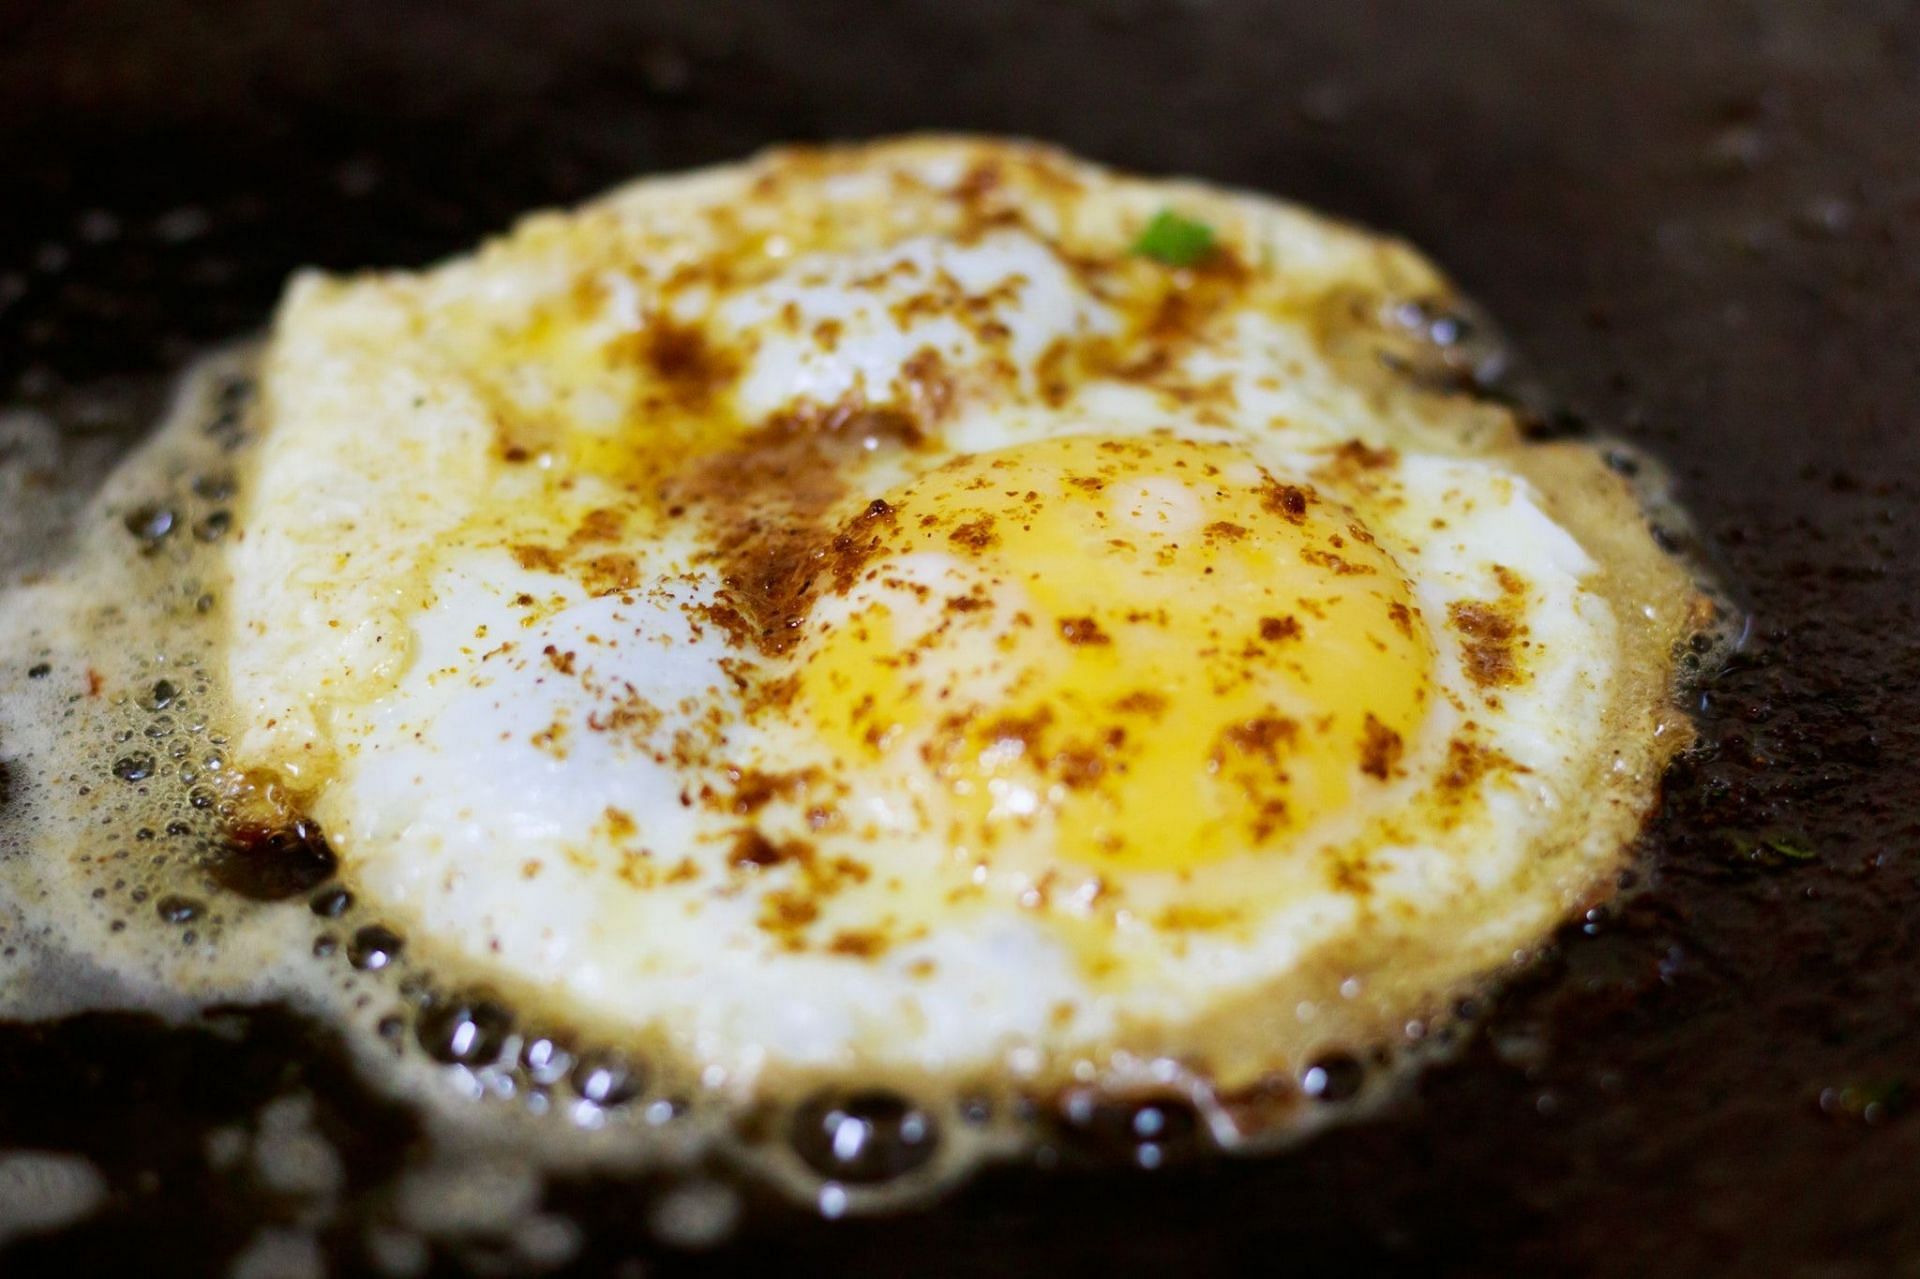 Fried or poached eggs are a great option for those on a low fiber diet (Image via Pexels/Megha Mangal)